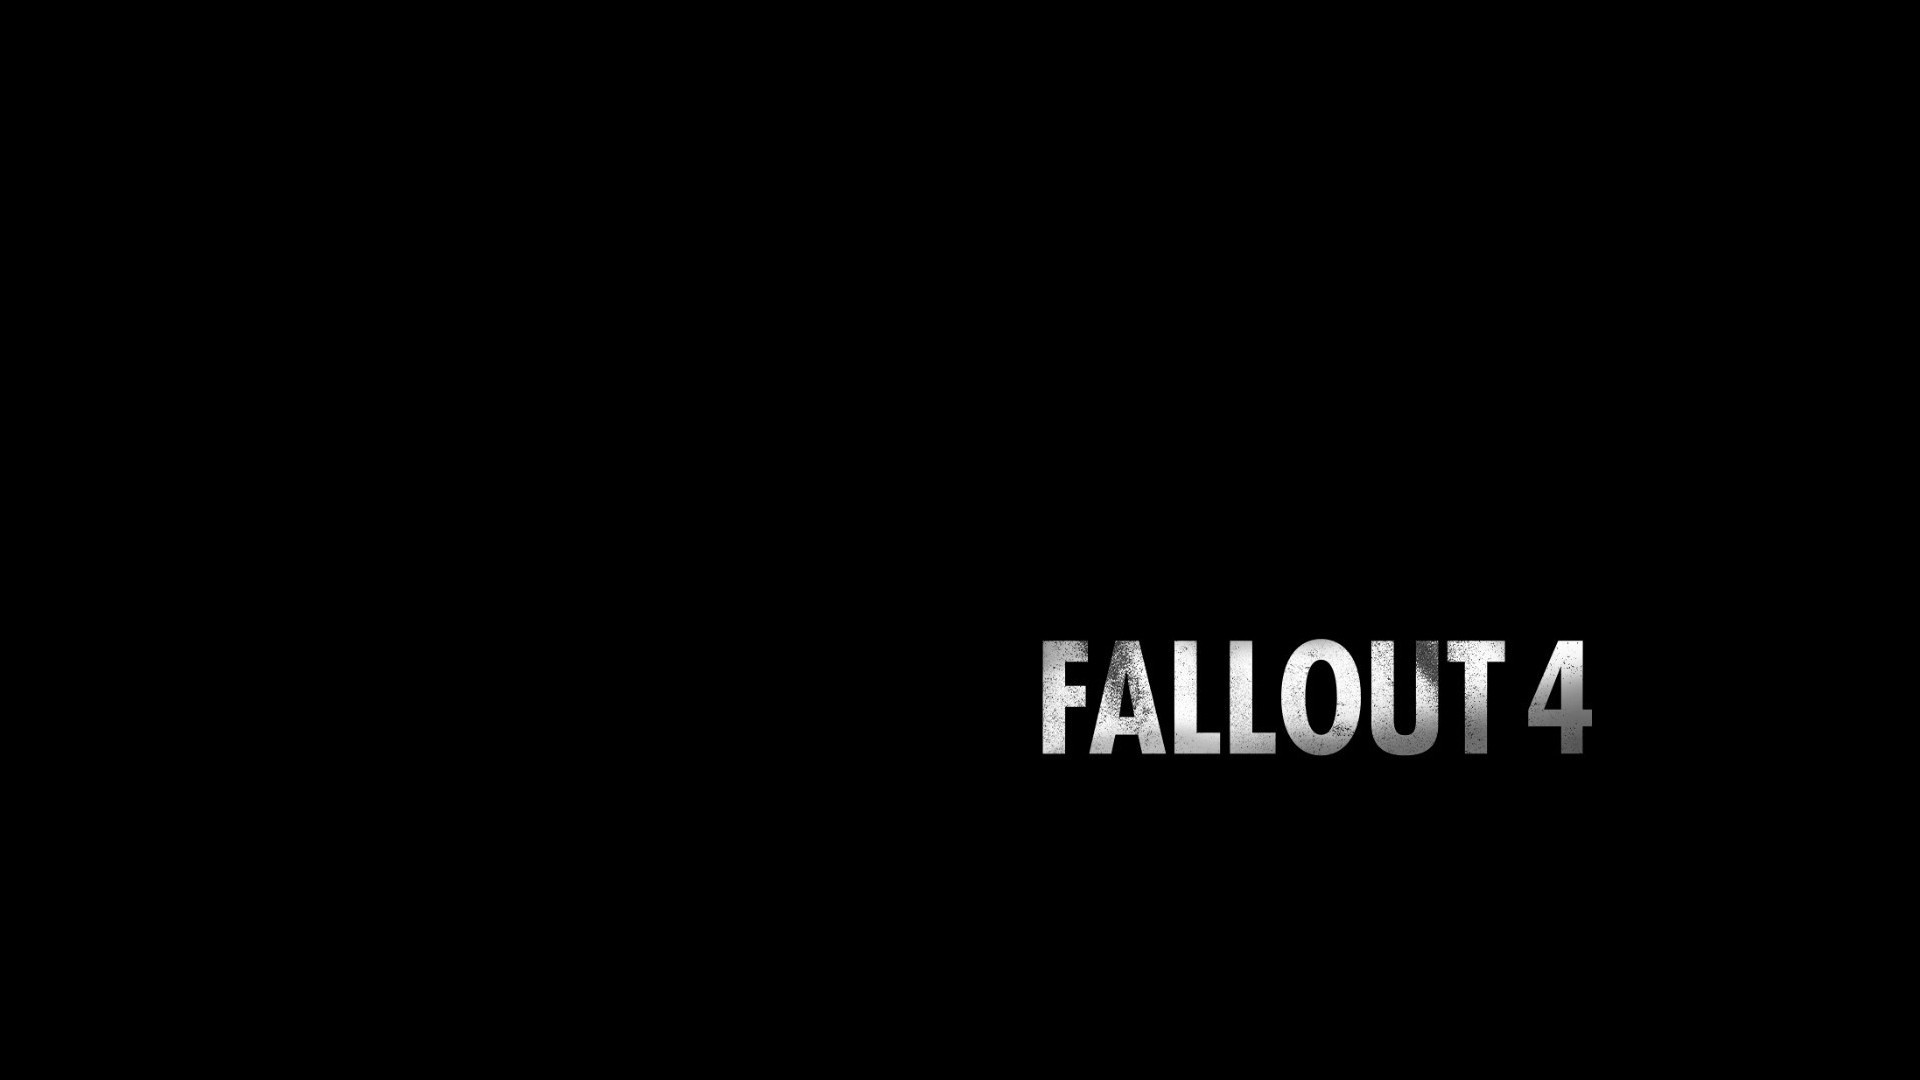 1920x1080 Fallout 4, Fallout, Typography, Black Background Wallpapers HD / Desktop  and Mobile Backgrounds